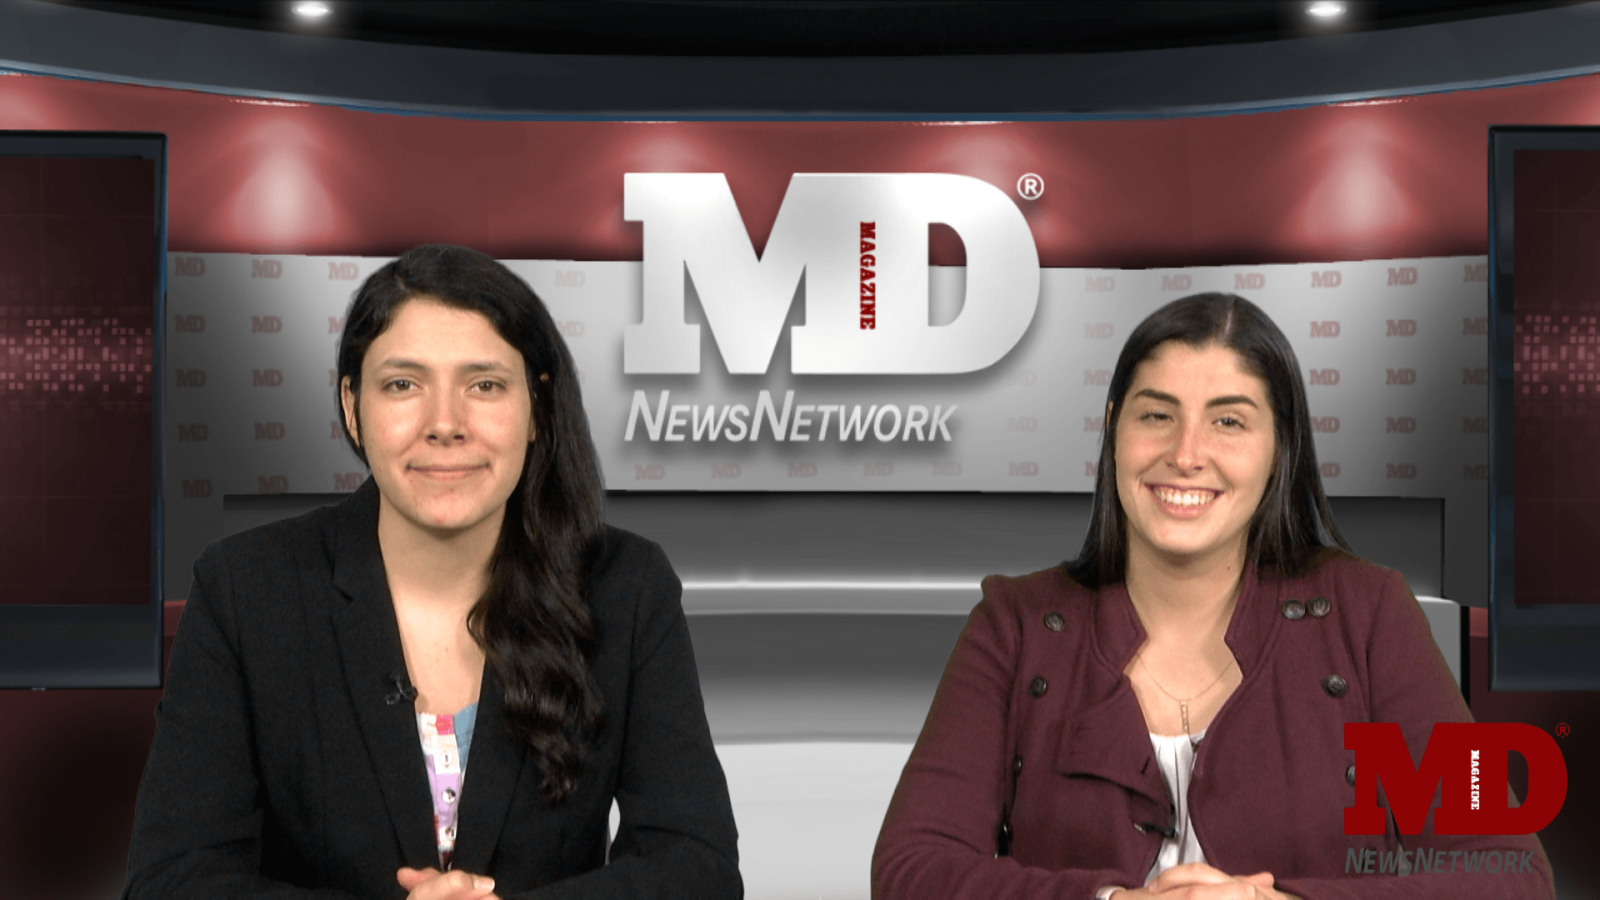 MDNN: Postive Results for Upadacitinib, HIV Testing for Older Adults, and US Disease Trends